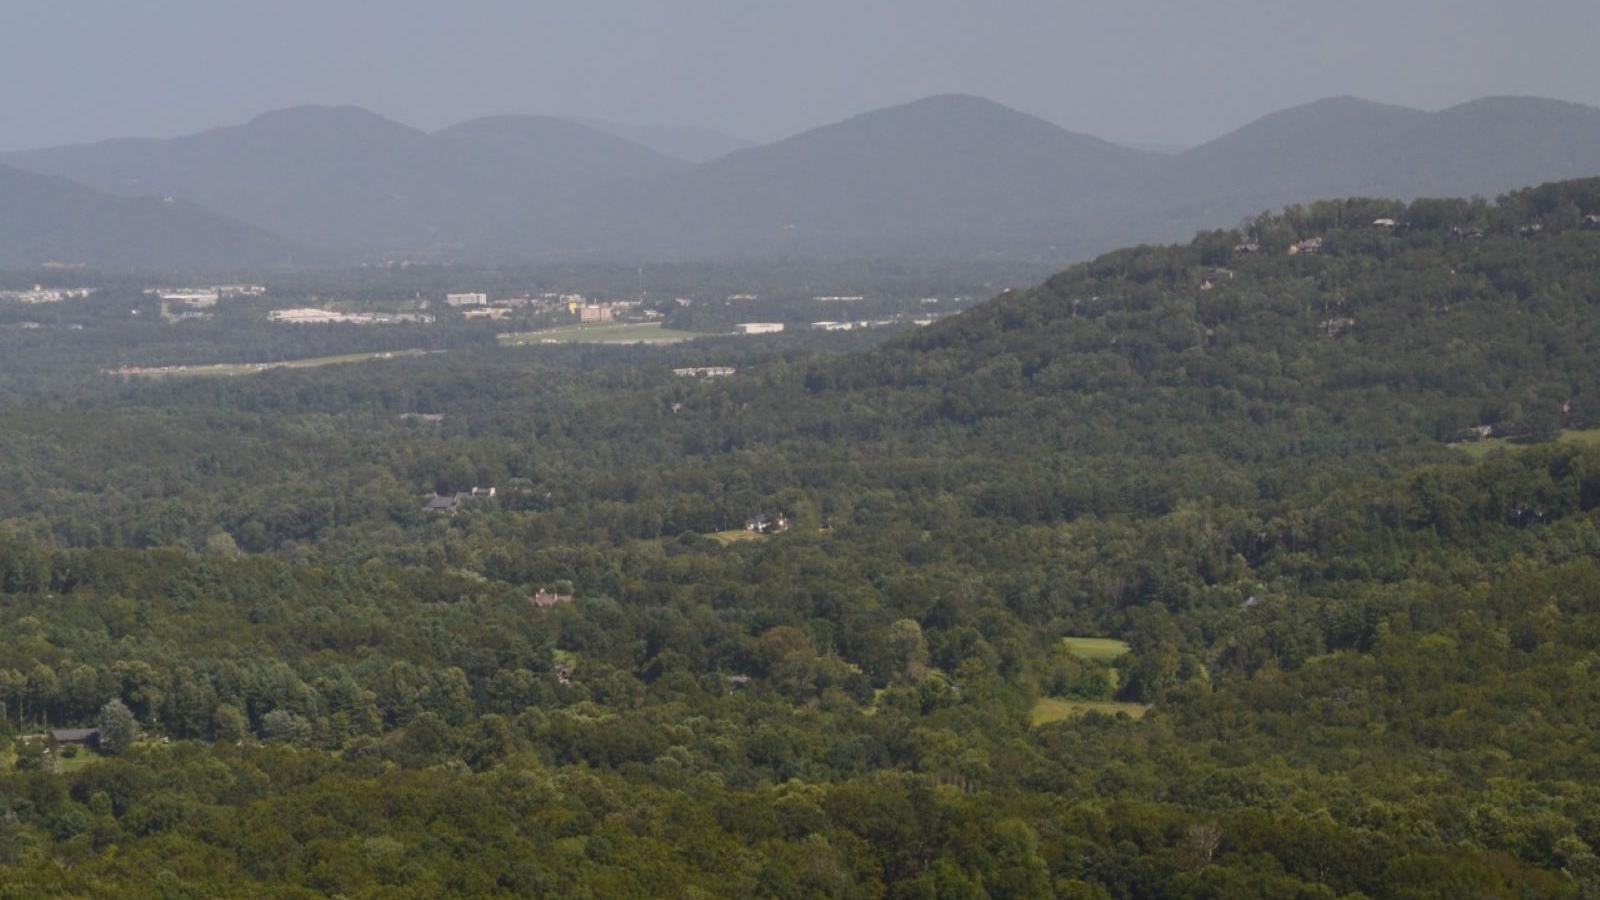 View of green Haw Creek Valley dotted with buildings and mountains in background